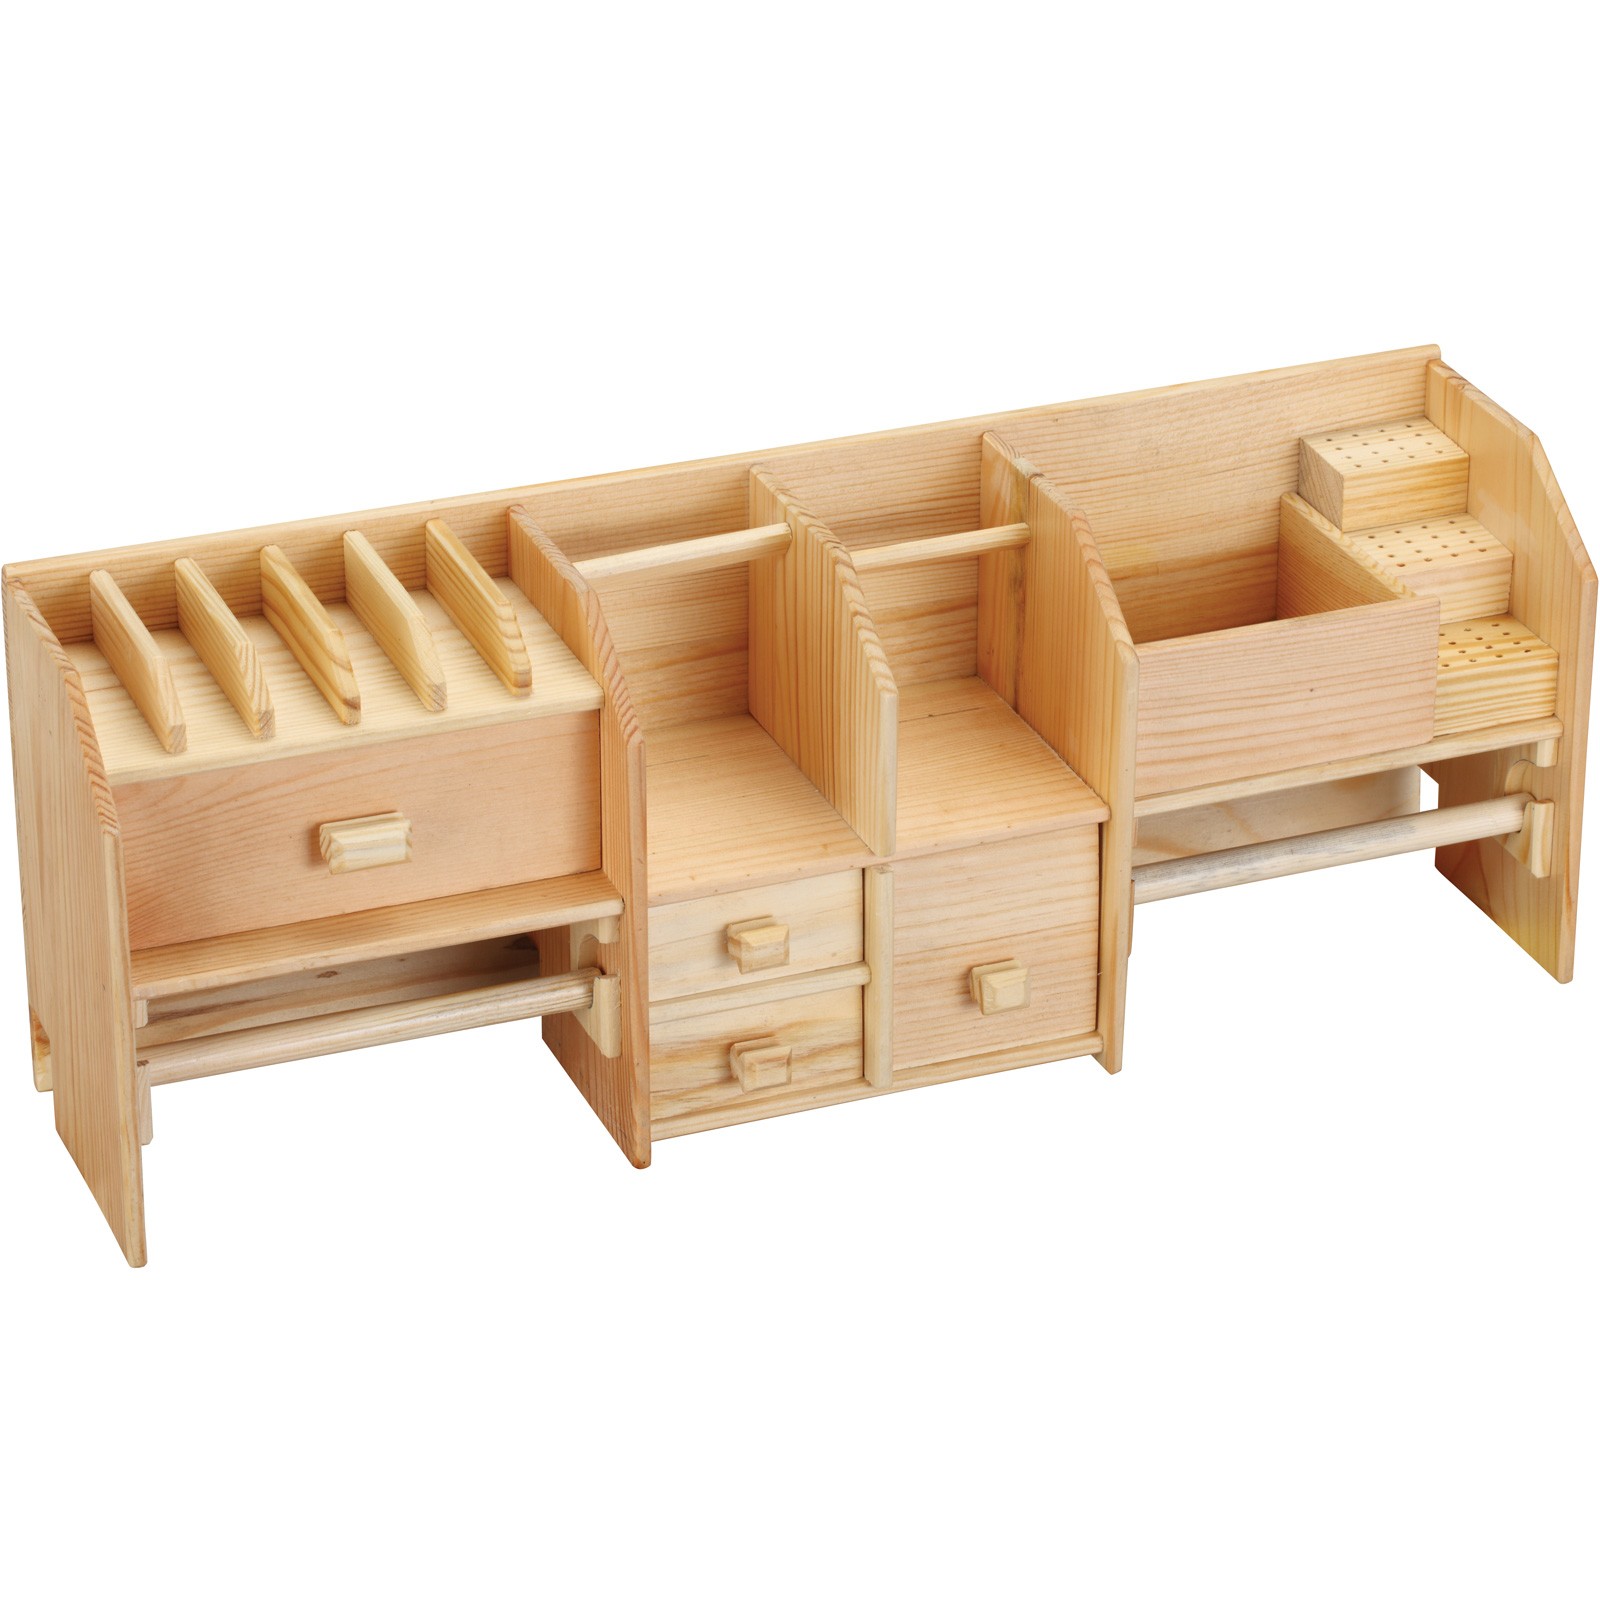 A&A Jewelry Supply - Mini Bench Top Tool Organizer